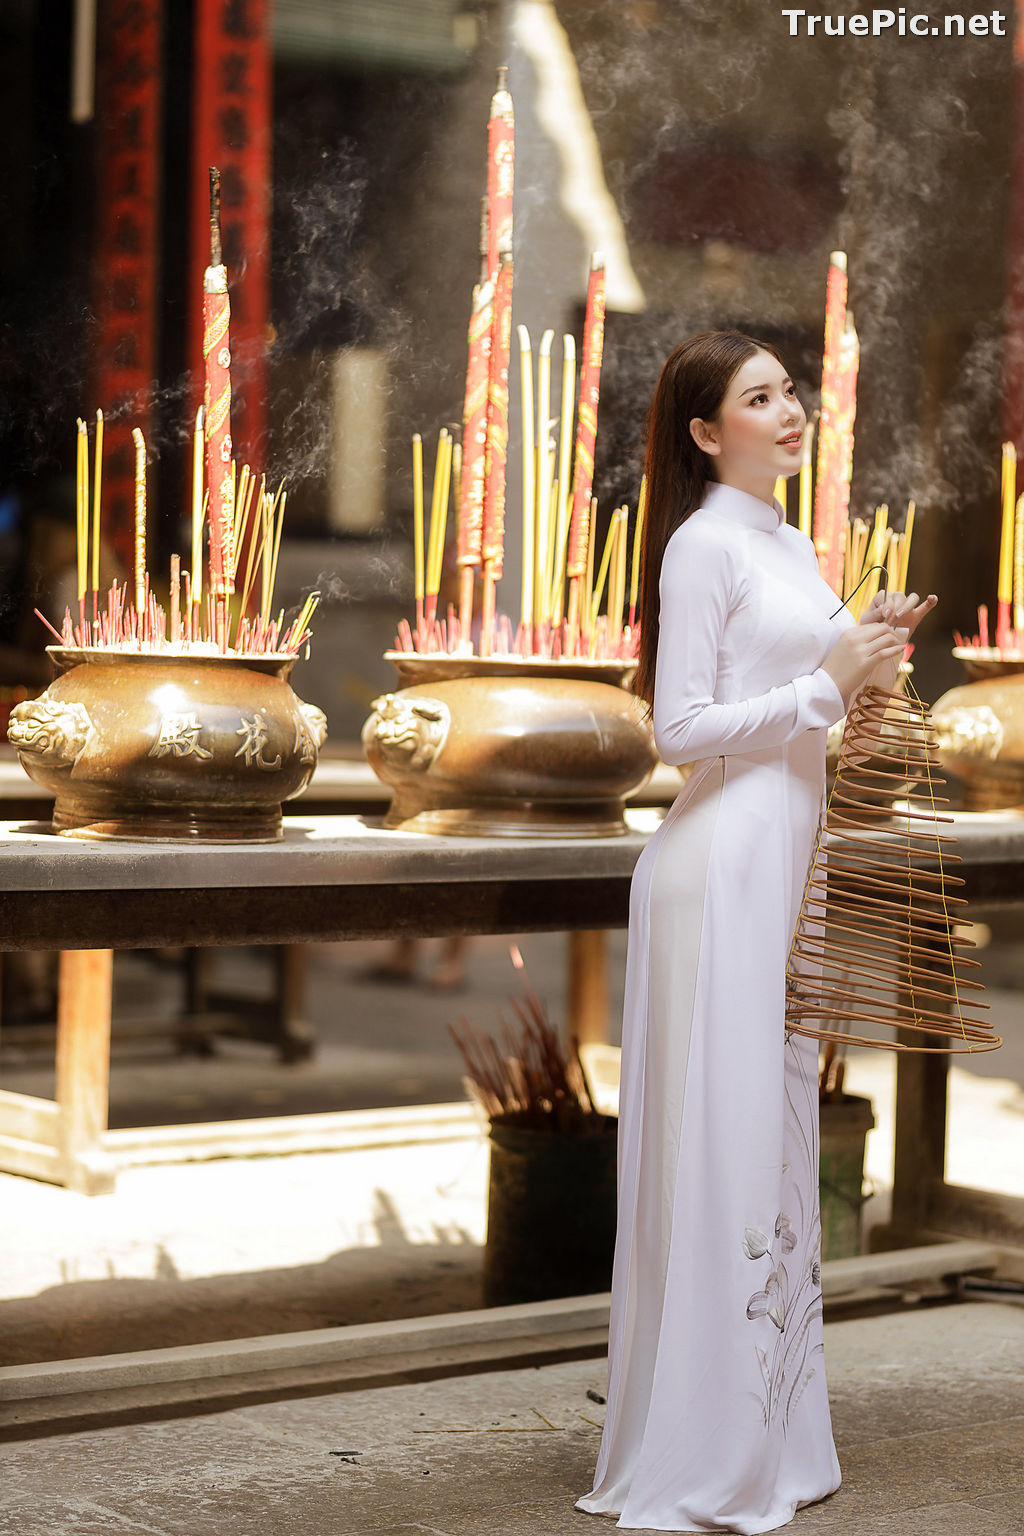 Image The Beauty of Vietnamese Girls with Traditional Dress (Ao Dai) #2 - TruePic.net - Picture-69